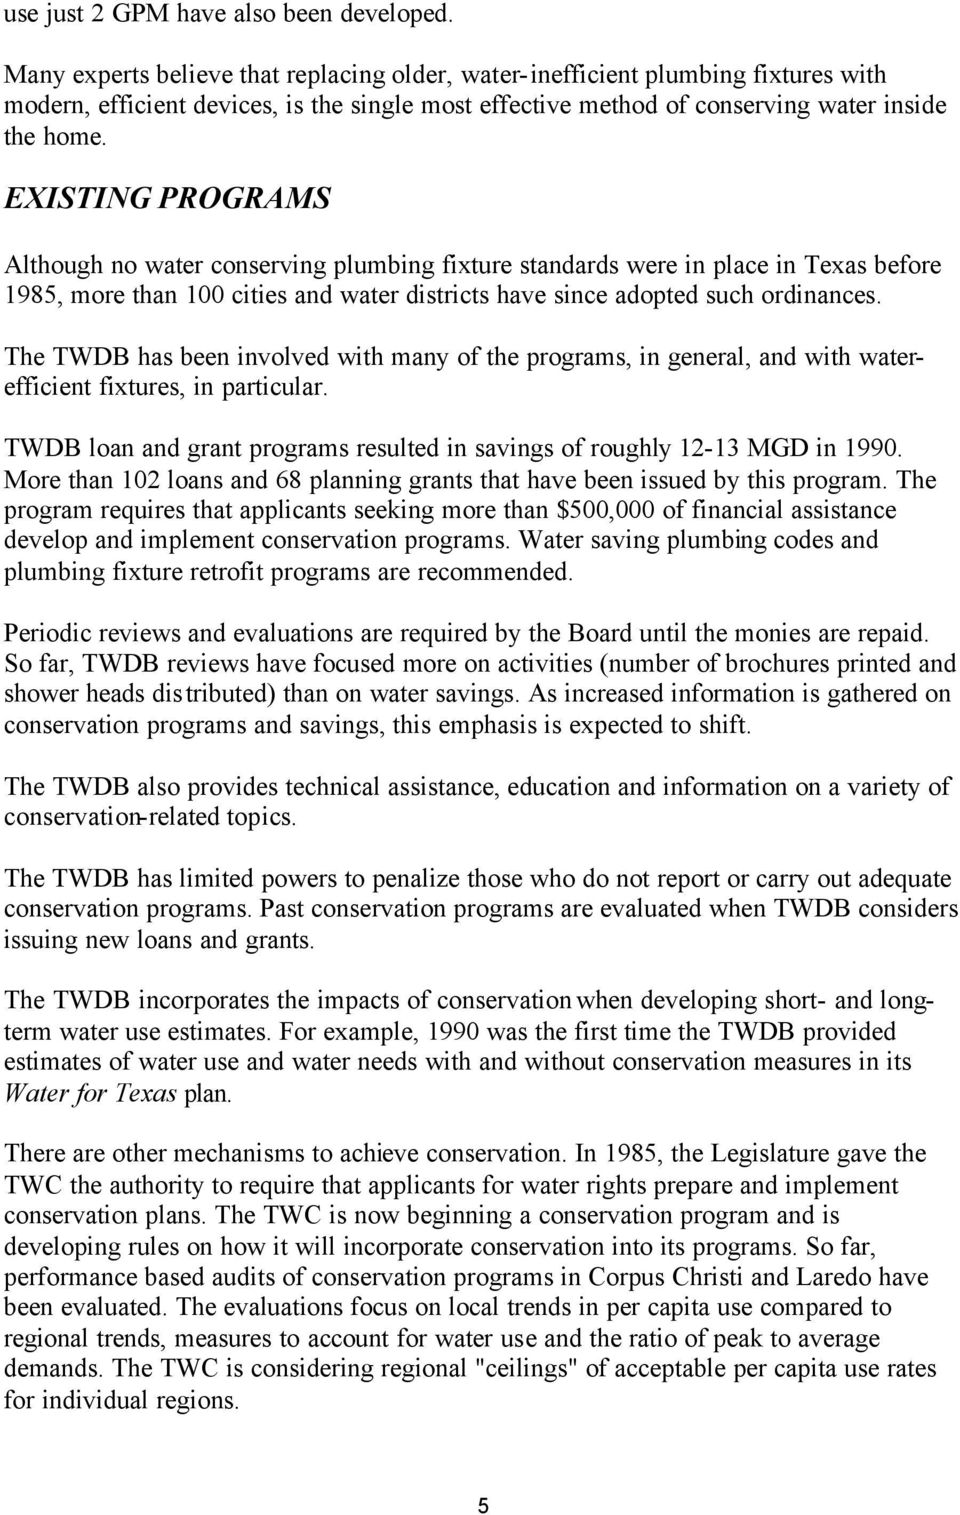 EXISTING PROGRAMS Although no water conserving plumbing fixture standards were in place in Texas before 1985, more than 100 cities and water districts have since adopted such ordinances.